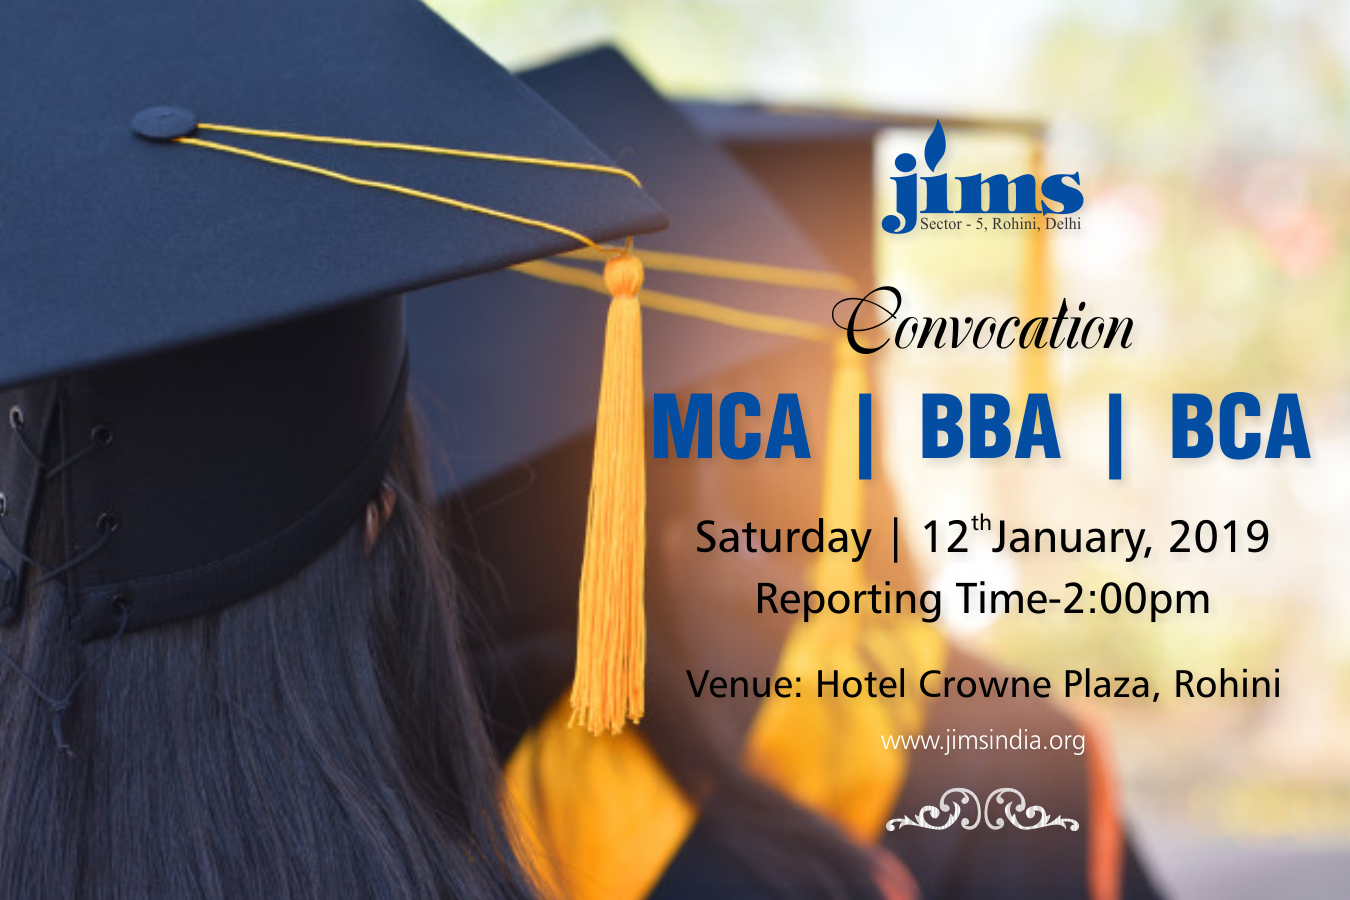 Convocation for MCA, BBA & BCA Batch 2015-2018 on Saturday, 12th January, 2019 2:00 PM Onwards